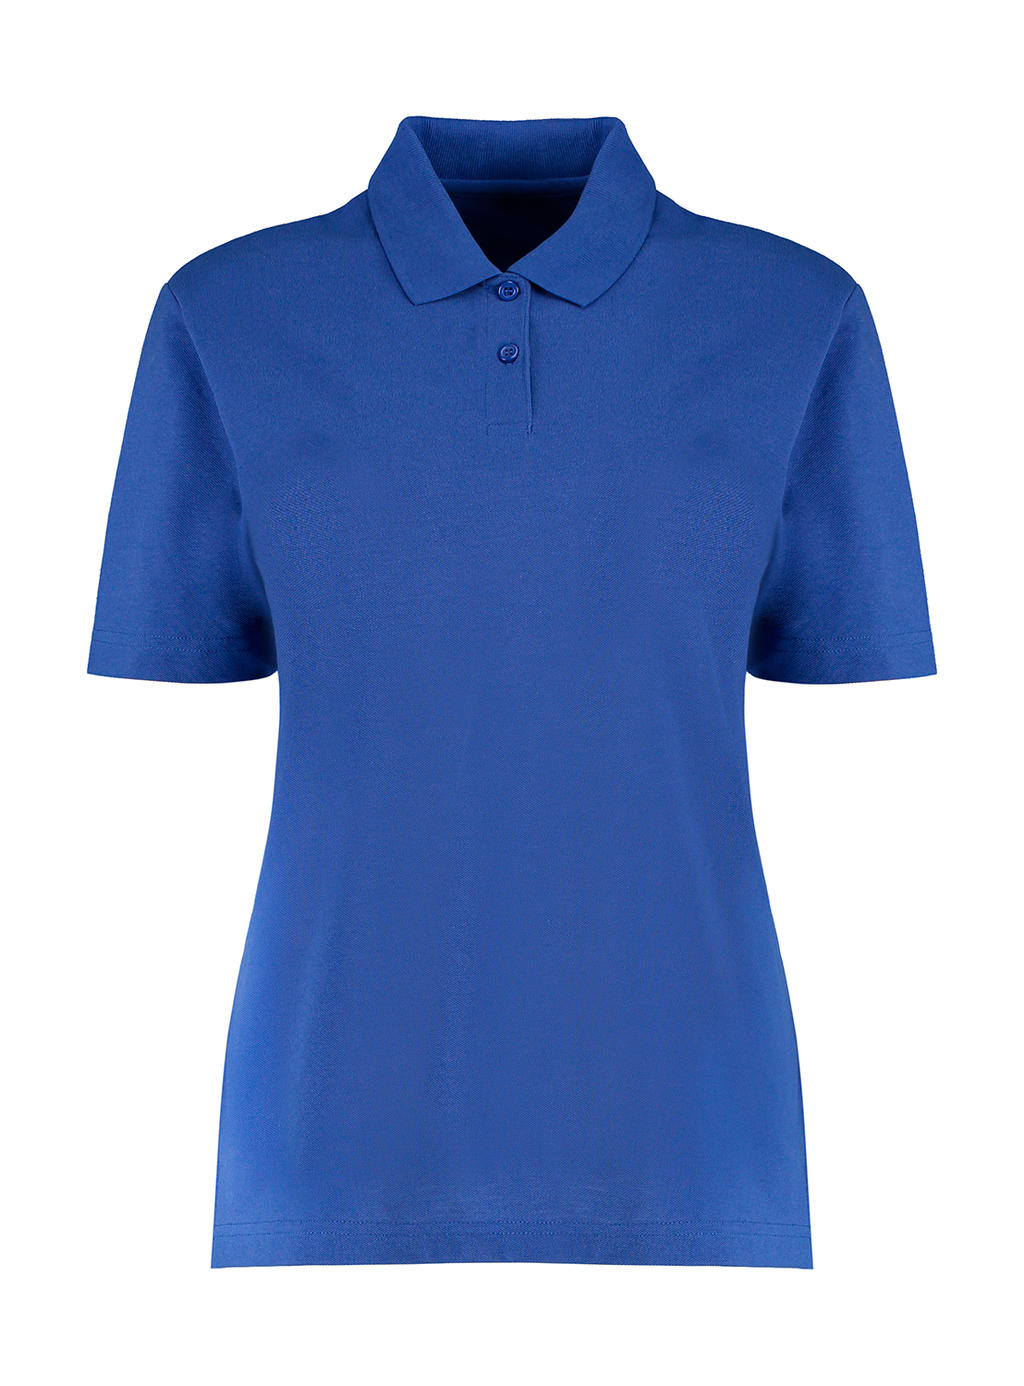  Womens Regular Fit Workforce Polo in Farbe Royal